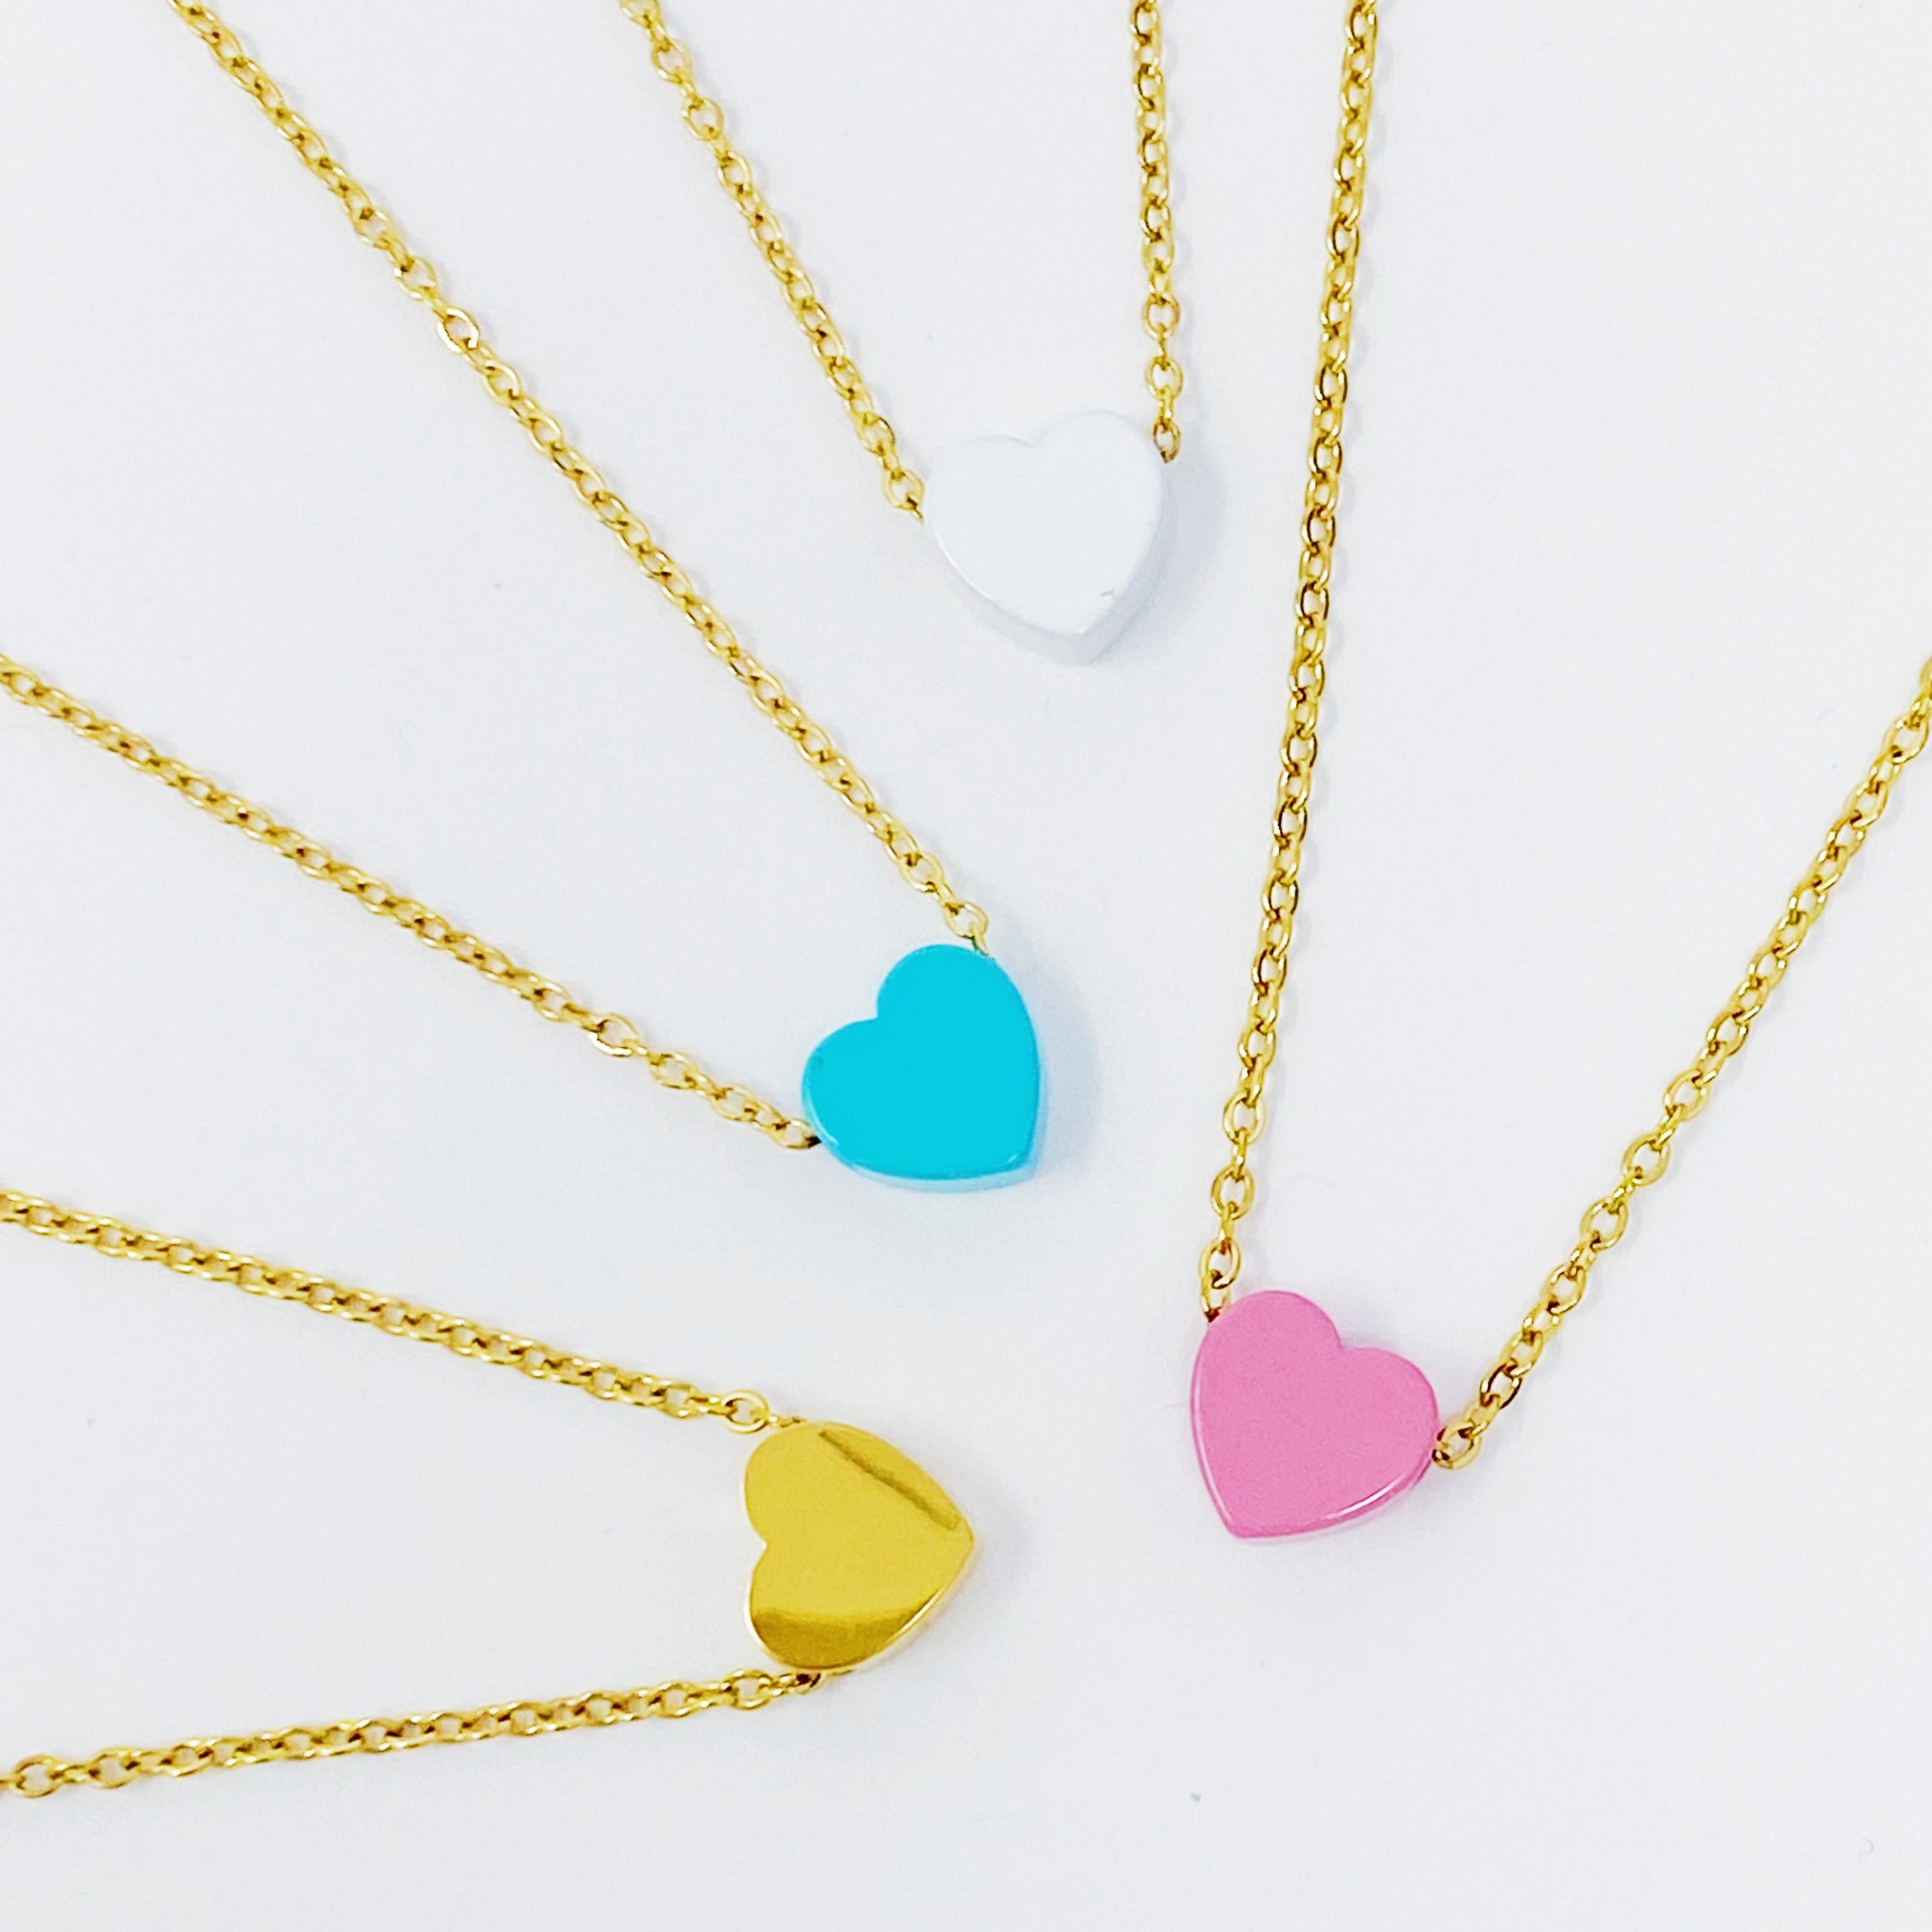 So Very Loved Heart Necklace by Ellisonyoung.com